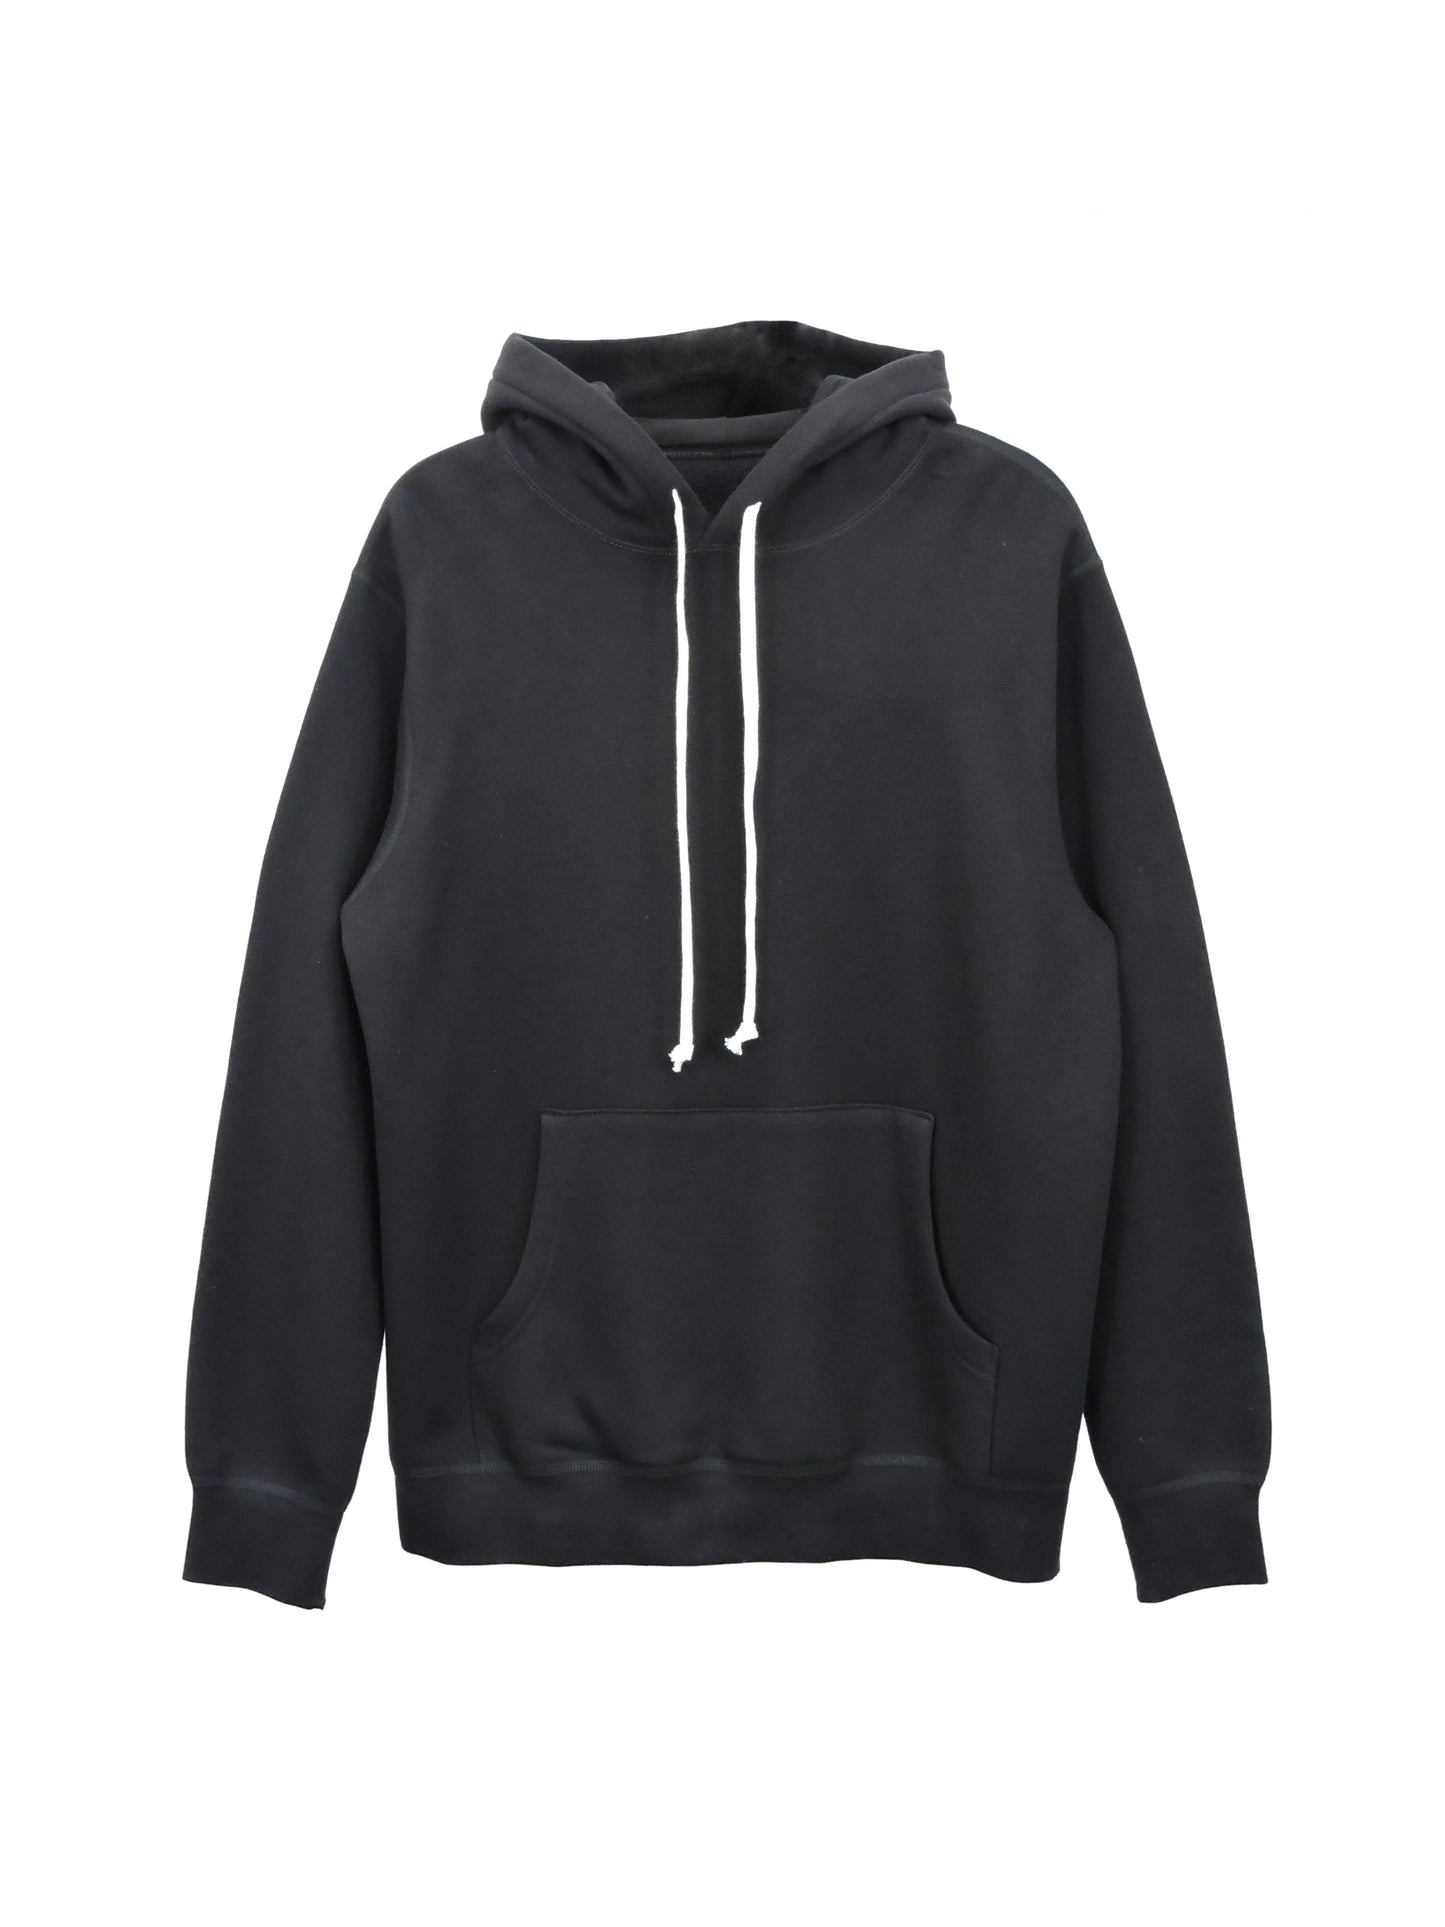 Black Hoodie with white drawstring and wide front pocket